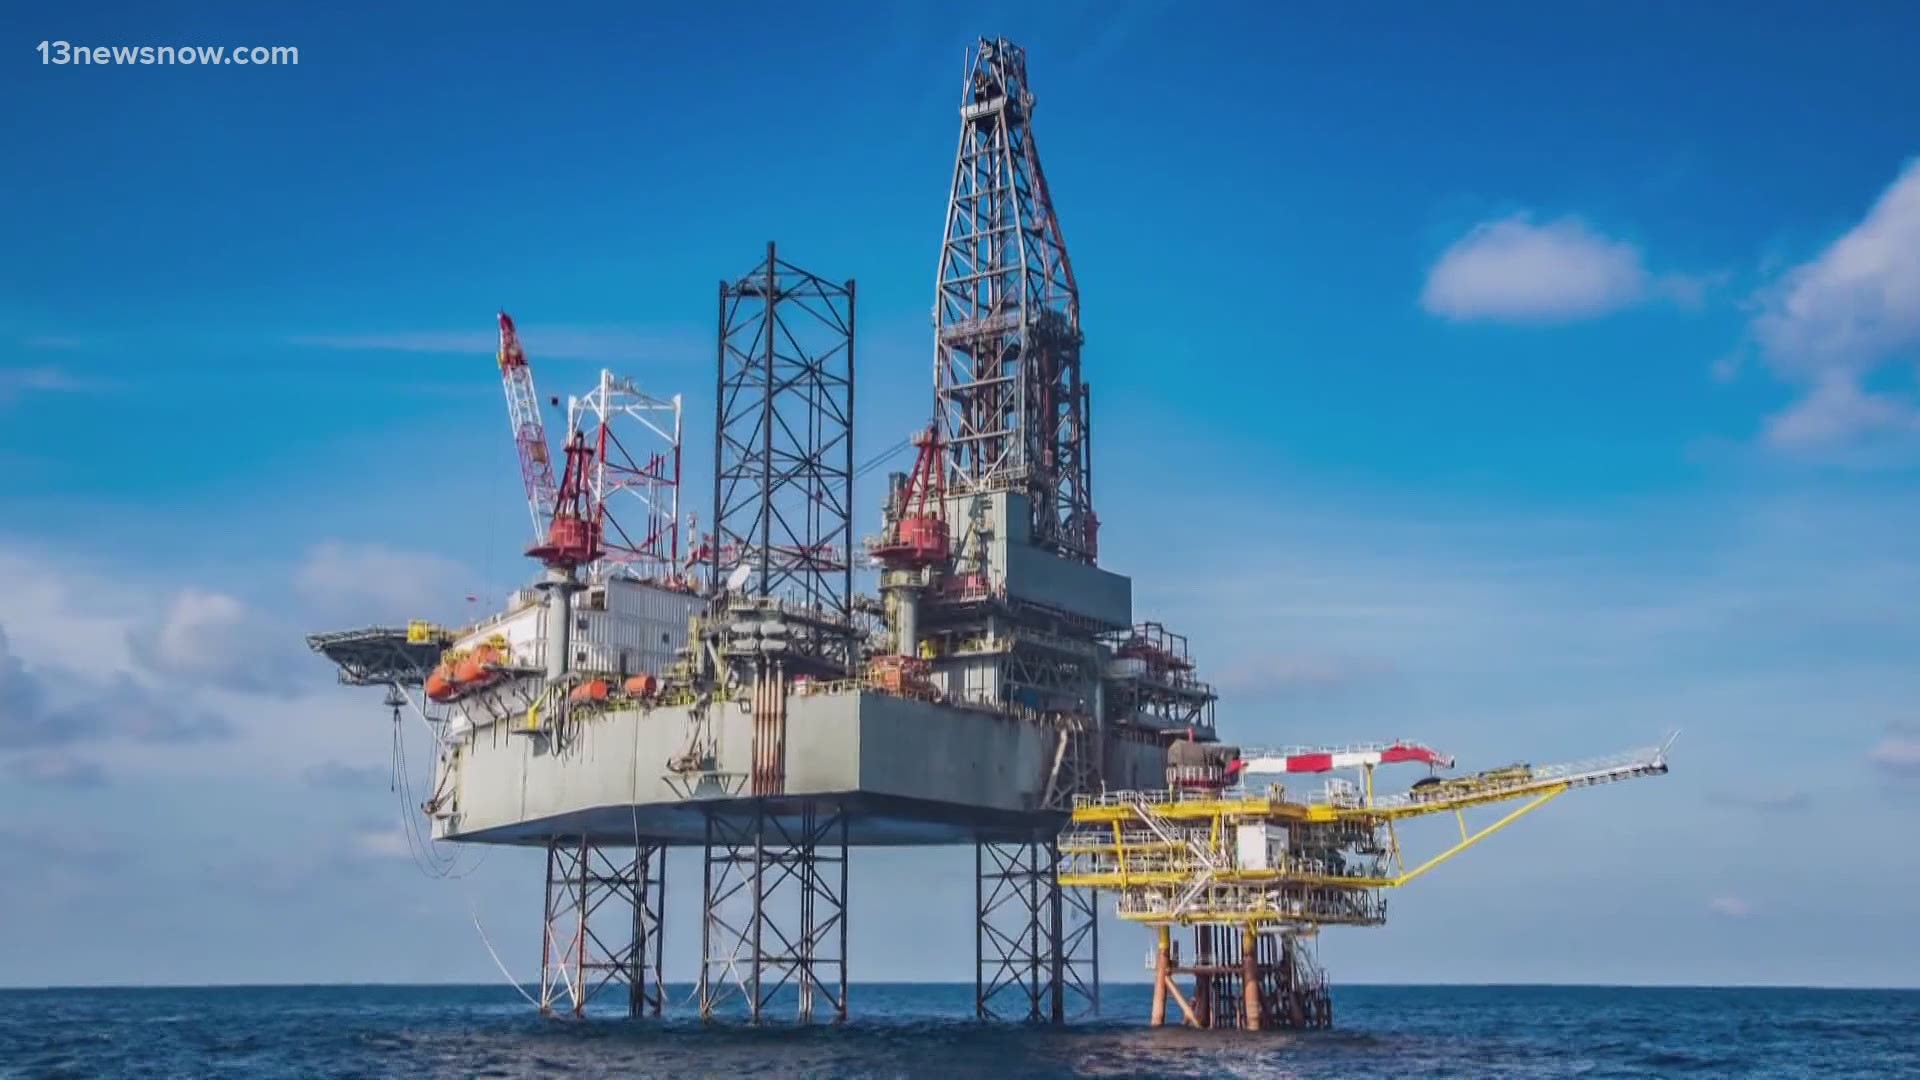 Nine members of Virginia's Congressional delegation are urging the White House to extend a moratorium on off-shore oil and gas drilling.